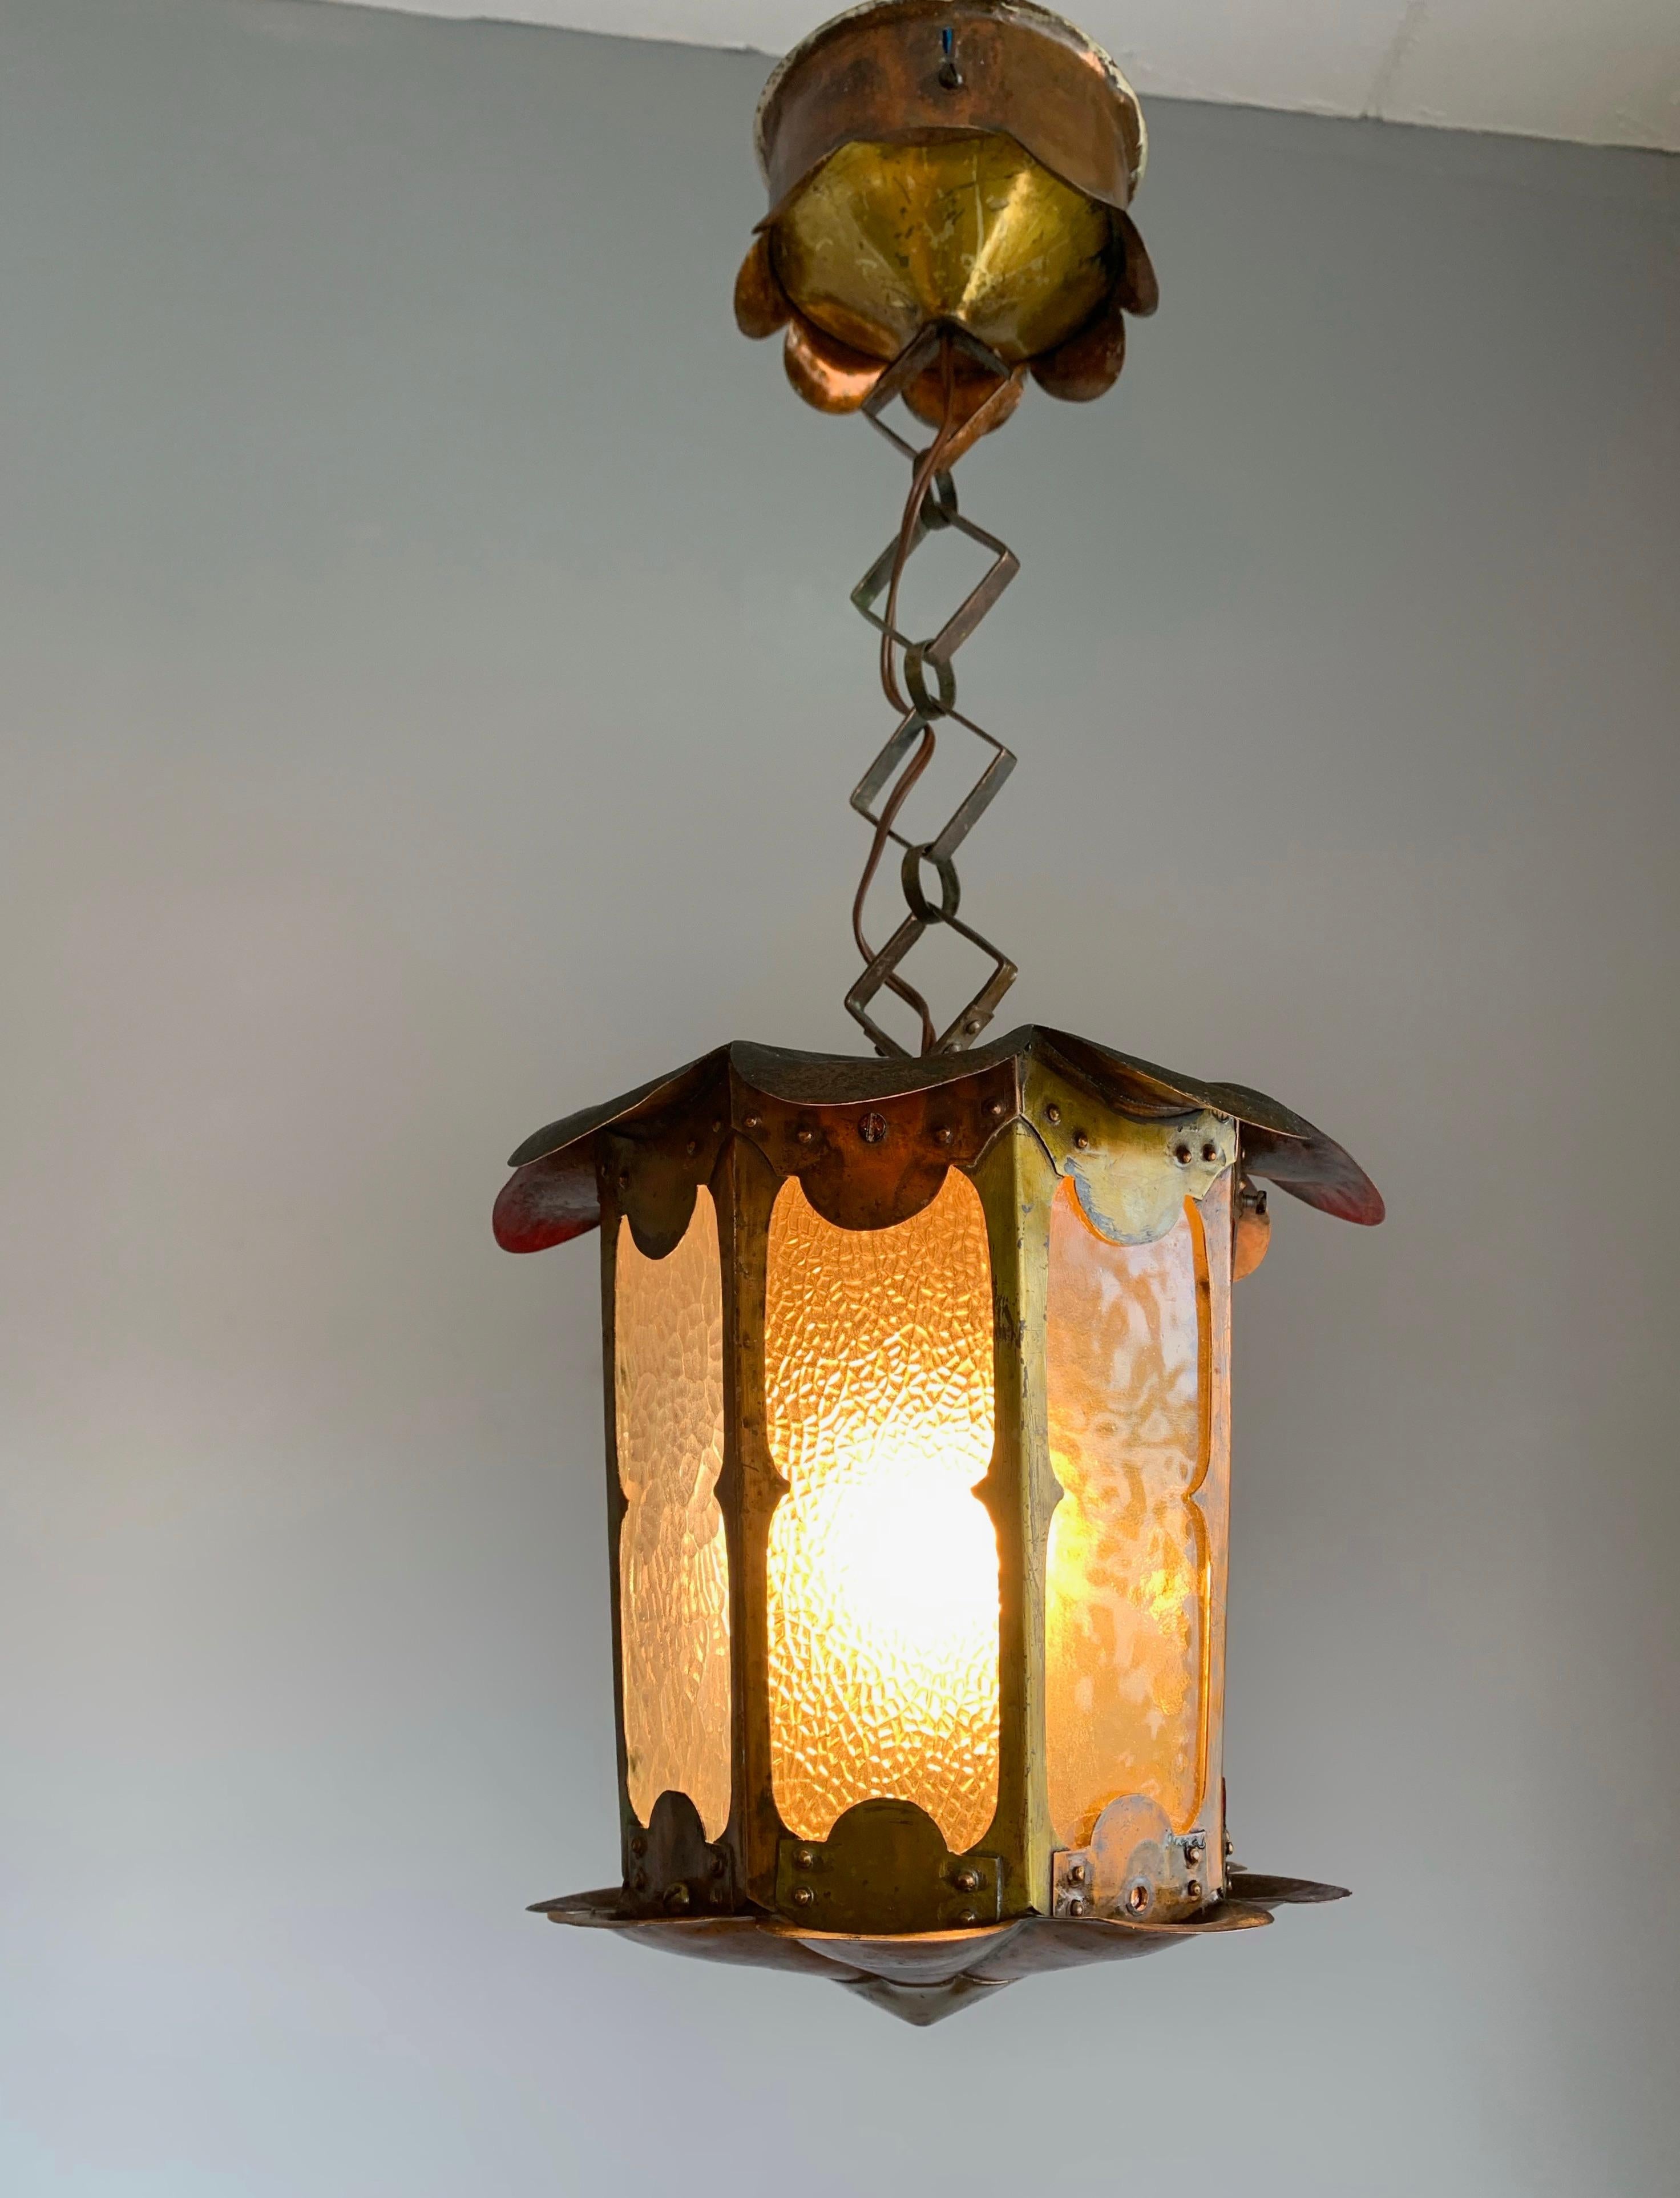 20th Century Unique Arts & Crafts Patinated Copper & Cathedral Glass Pendant Light / Fixture